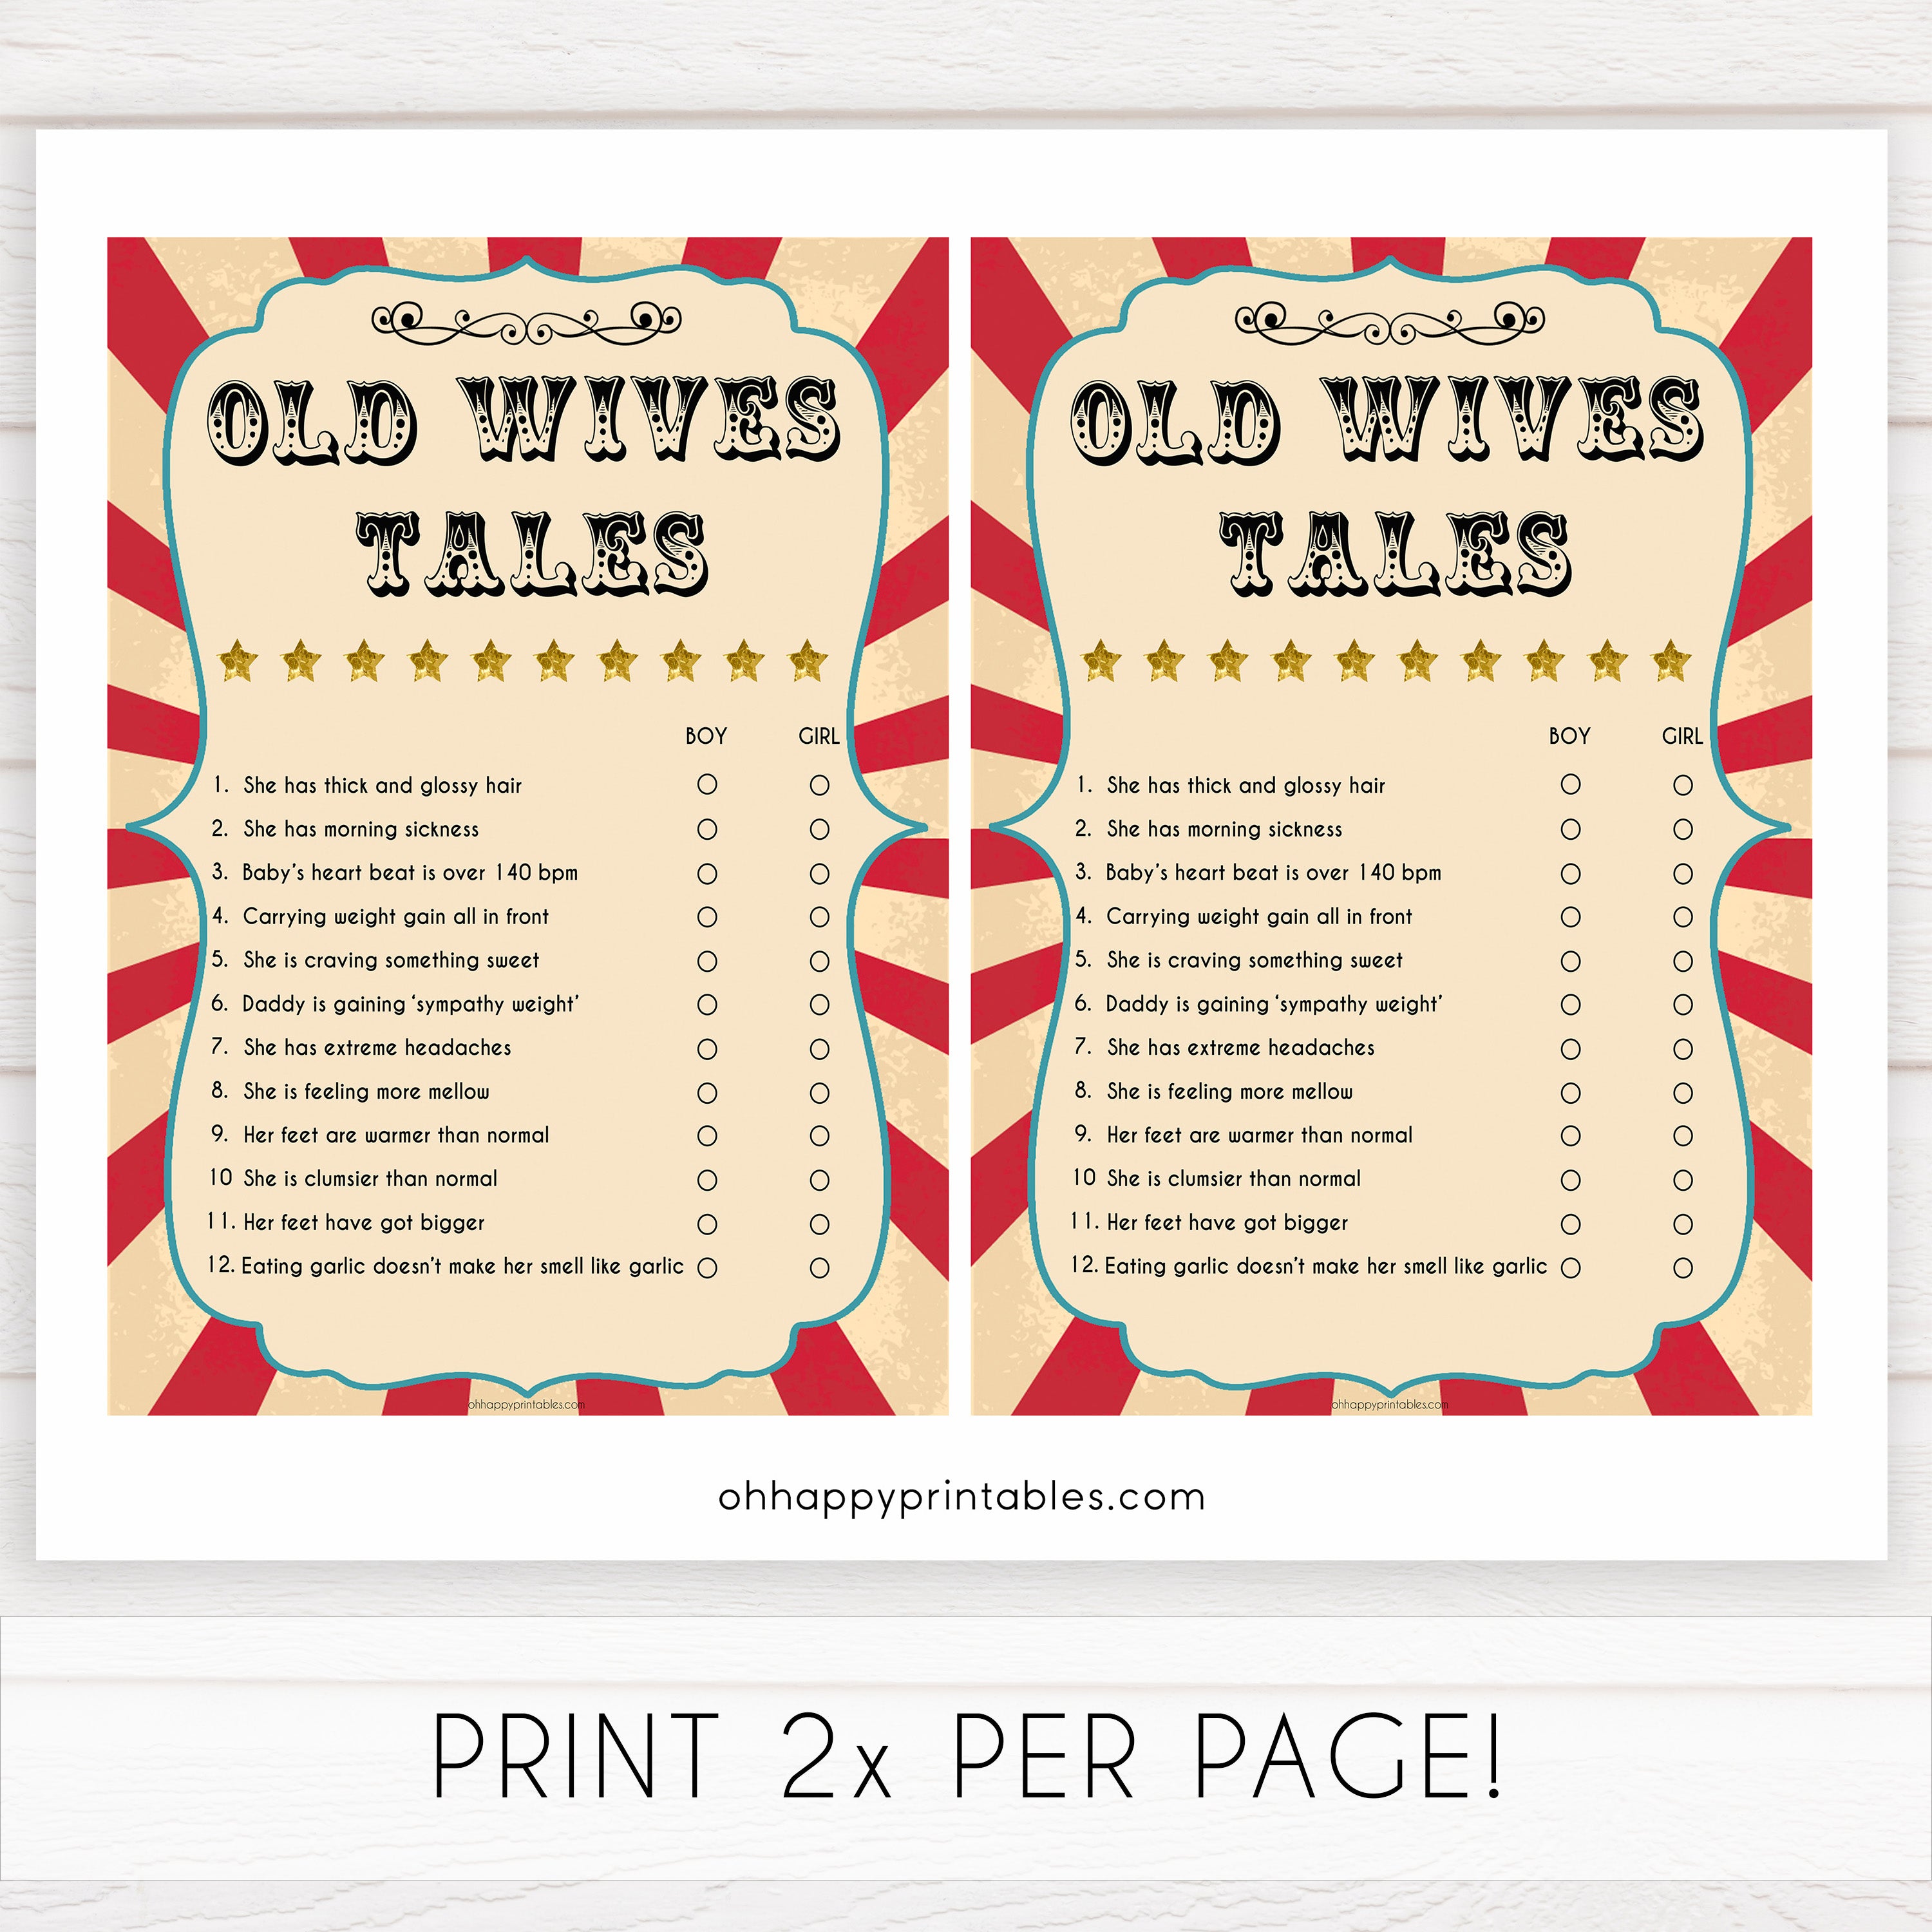 old wives tale game, baby old wives tales baby shower game, Printable baby shower games, circus fun baby games, baby shower games, fun baby shower ideas, top baby shower ideas, carnival baby shower, circus baby shower ideas